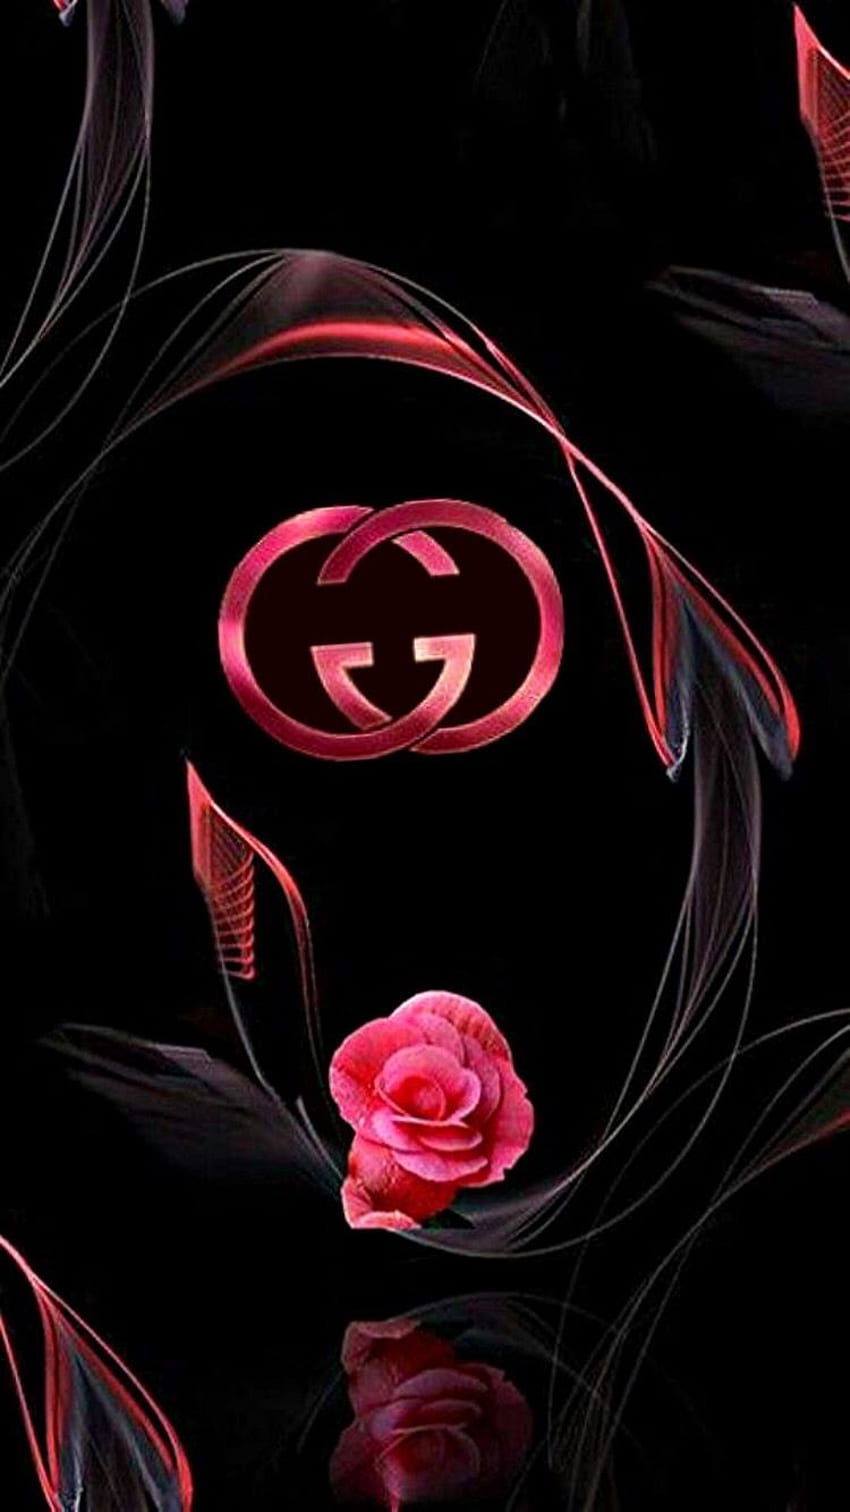 Gucci logo Wallpapers Download | MobCup